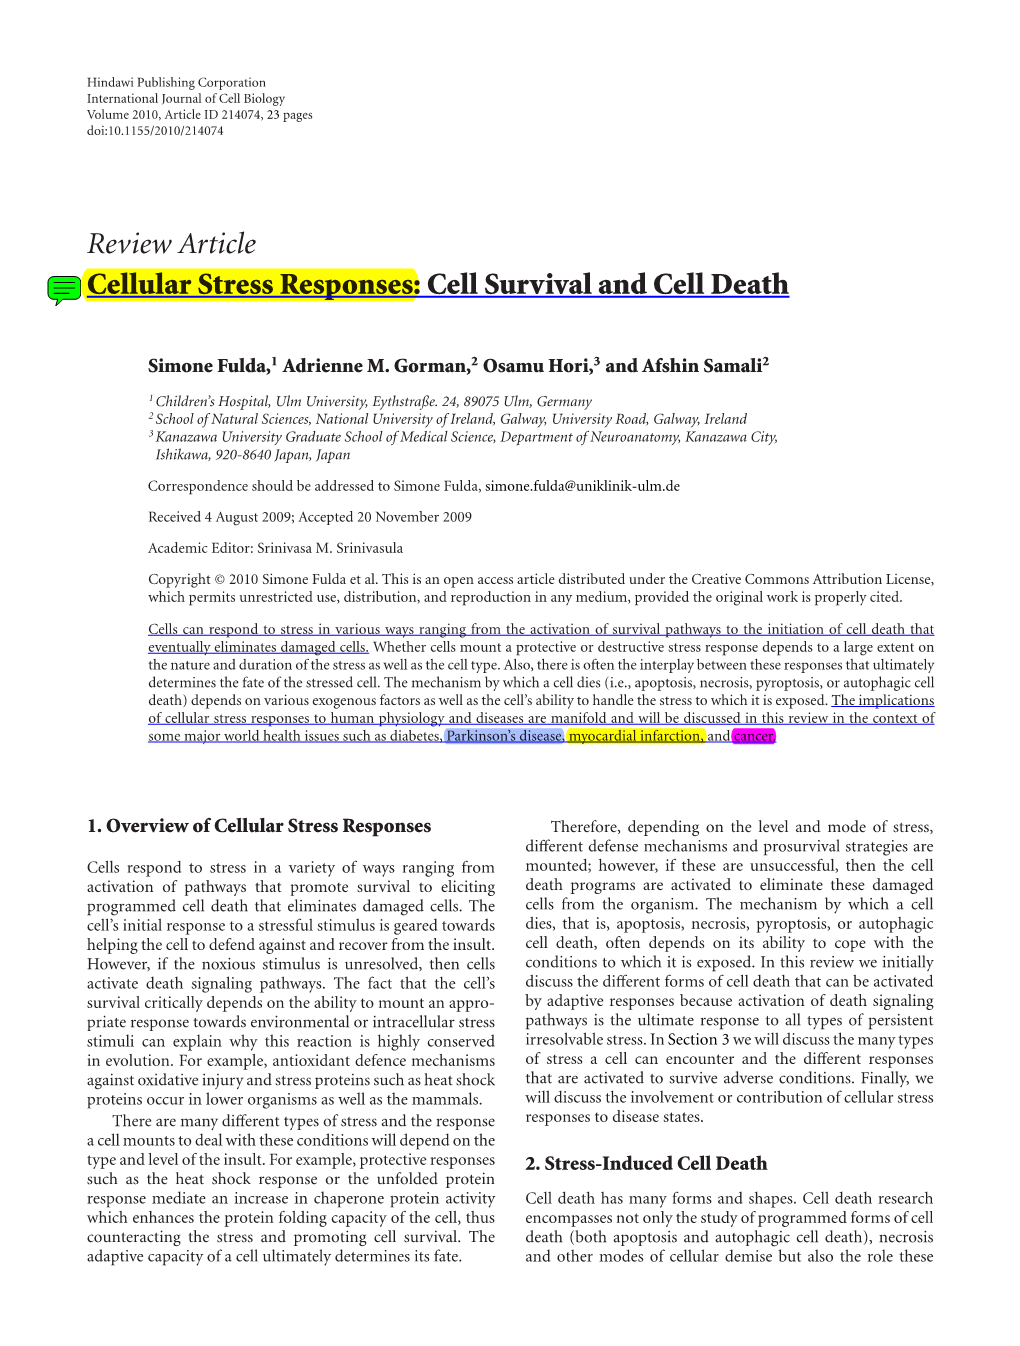 Review Article Cellular Stress Responses: Cell Survival and Cell Death